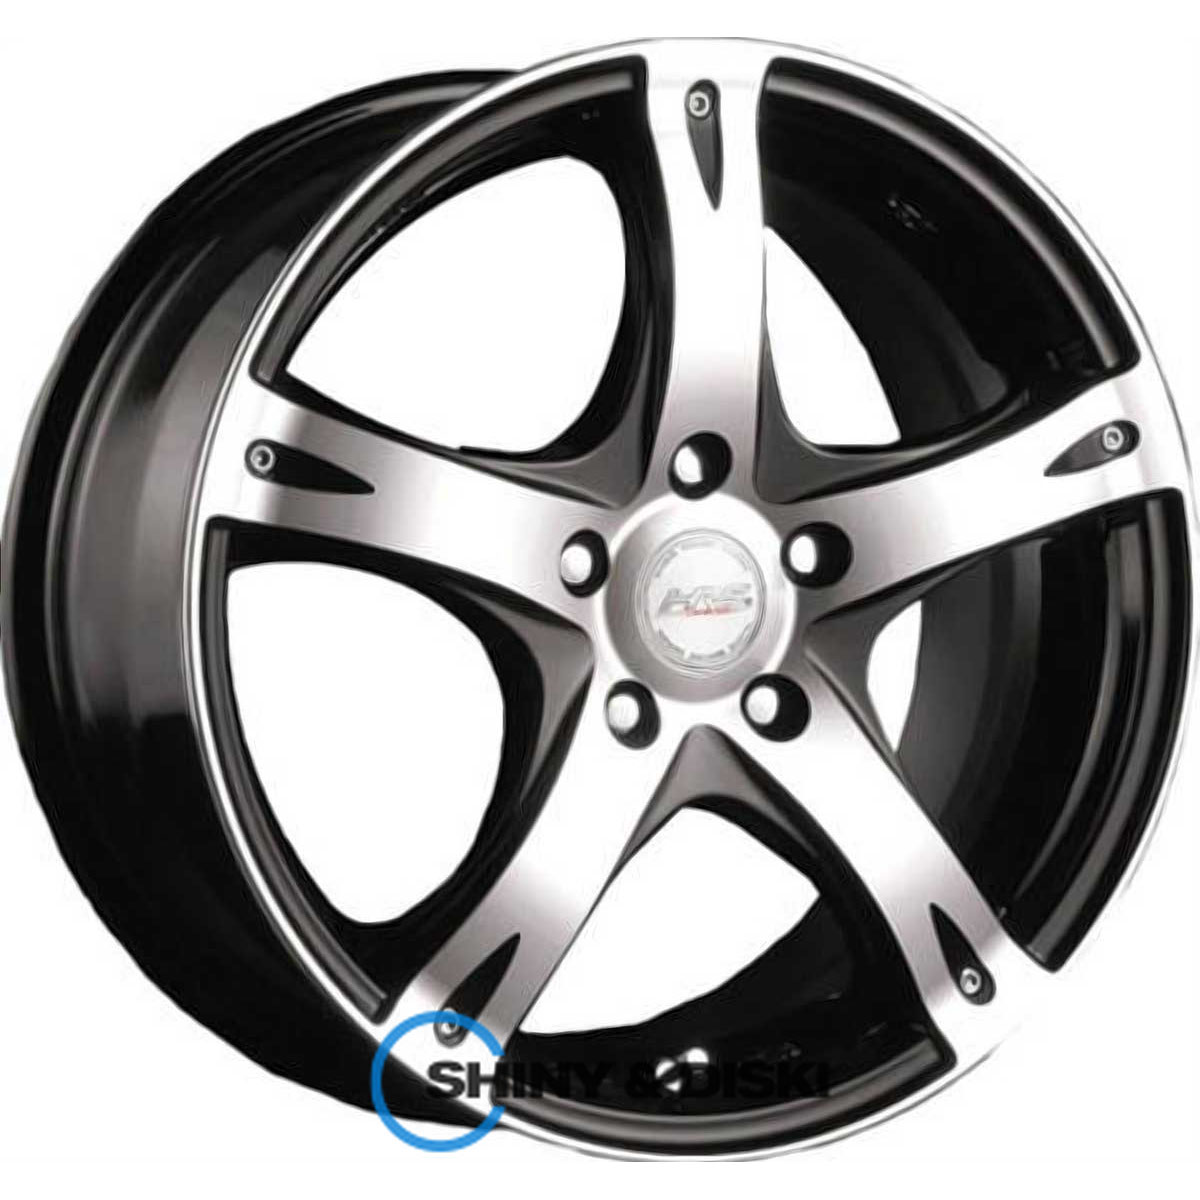 rs tuning h-366 gmfp r15 w6.5 pcd5x112 et40 dia66.6